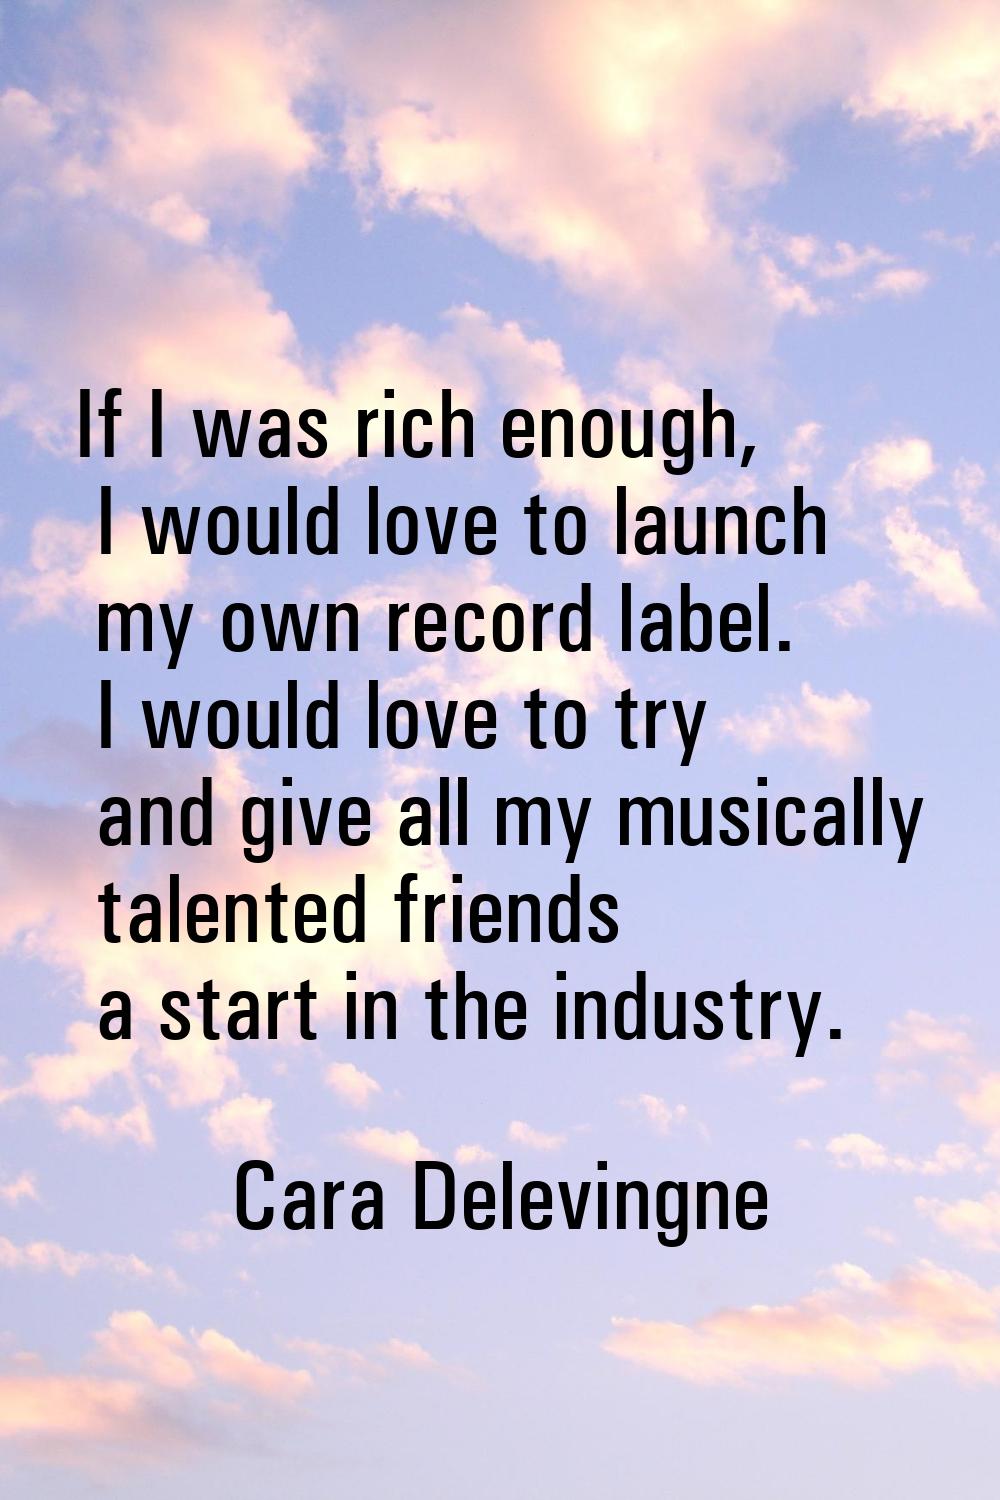 If I was rich enough, I would love to launch my own record label. I would love to try and give all 